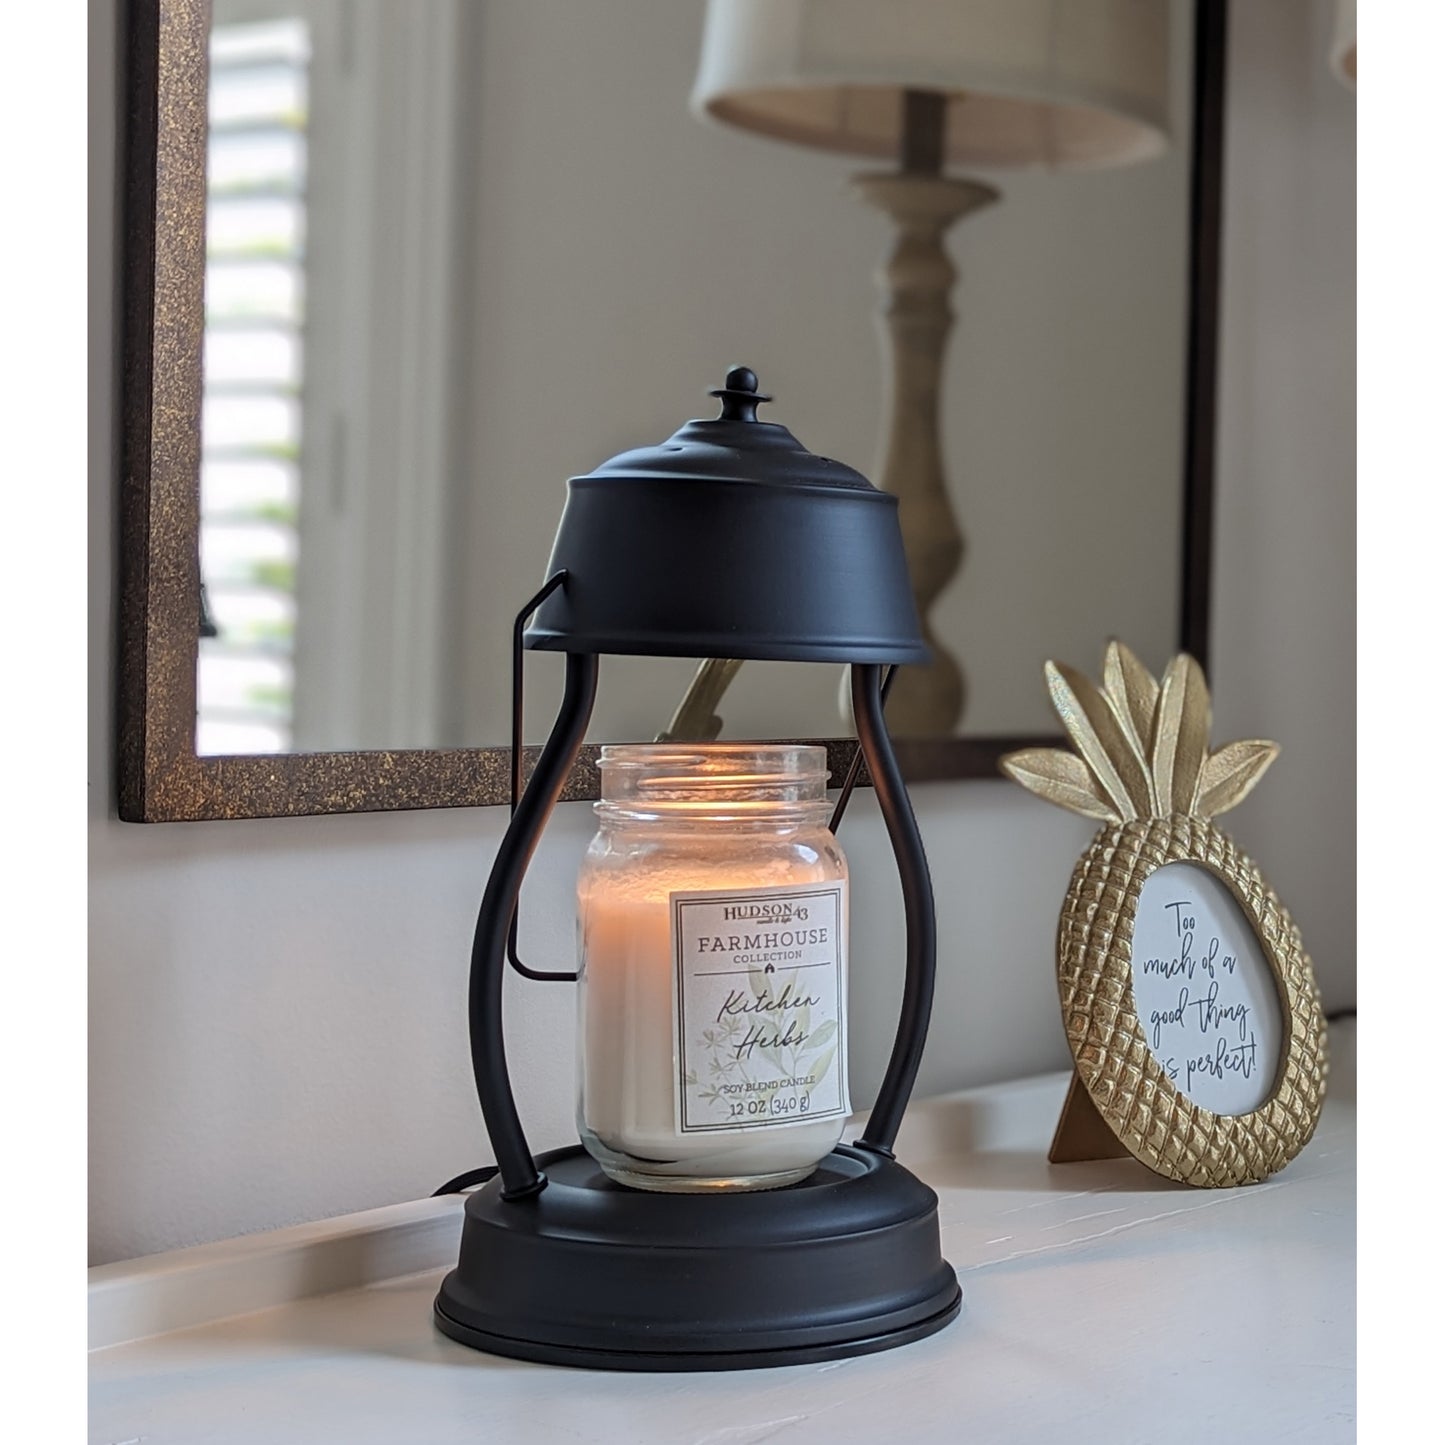 Image, lit black candle warmer with larger mason jar scented candle placed on an entry hall table.